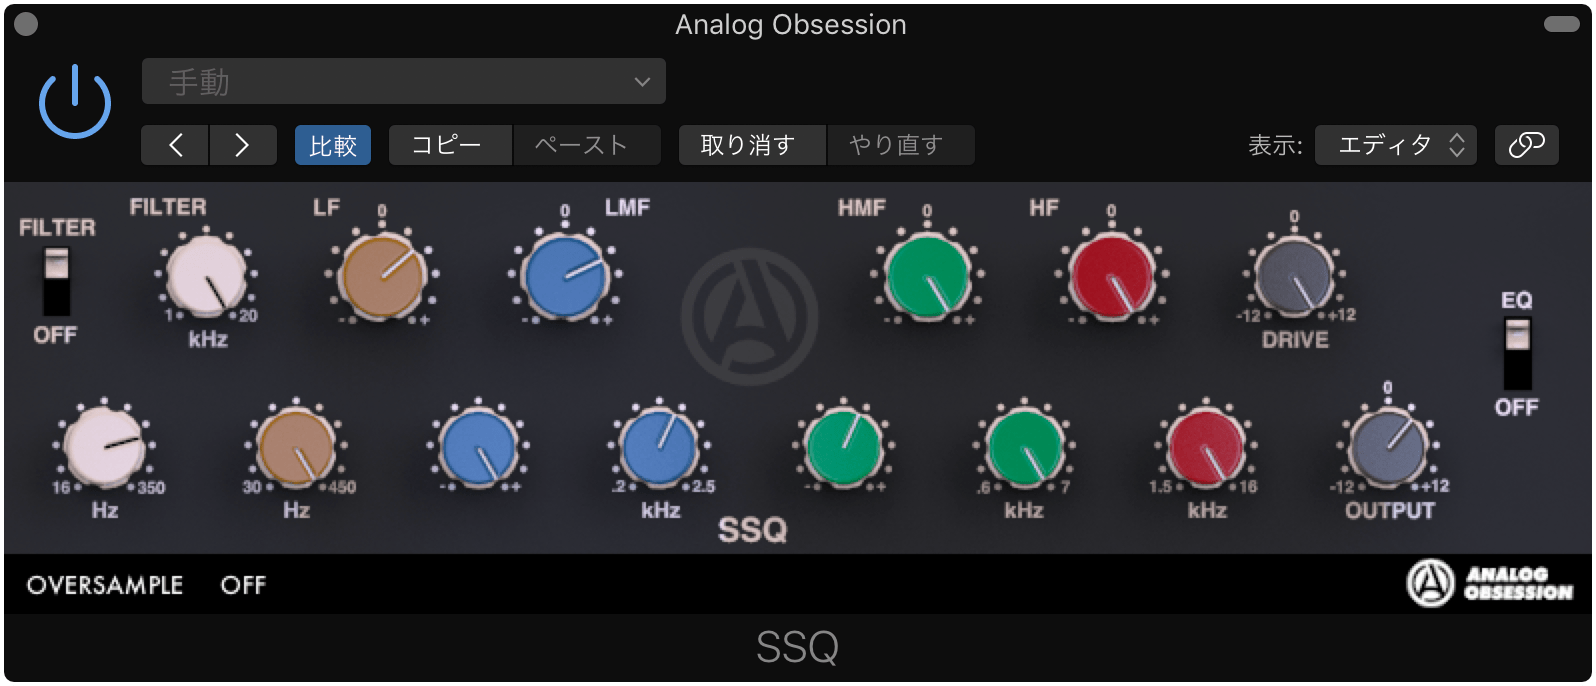 SSQ | Analog Obsession on Patreon